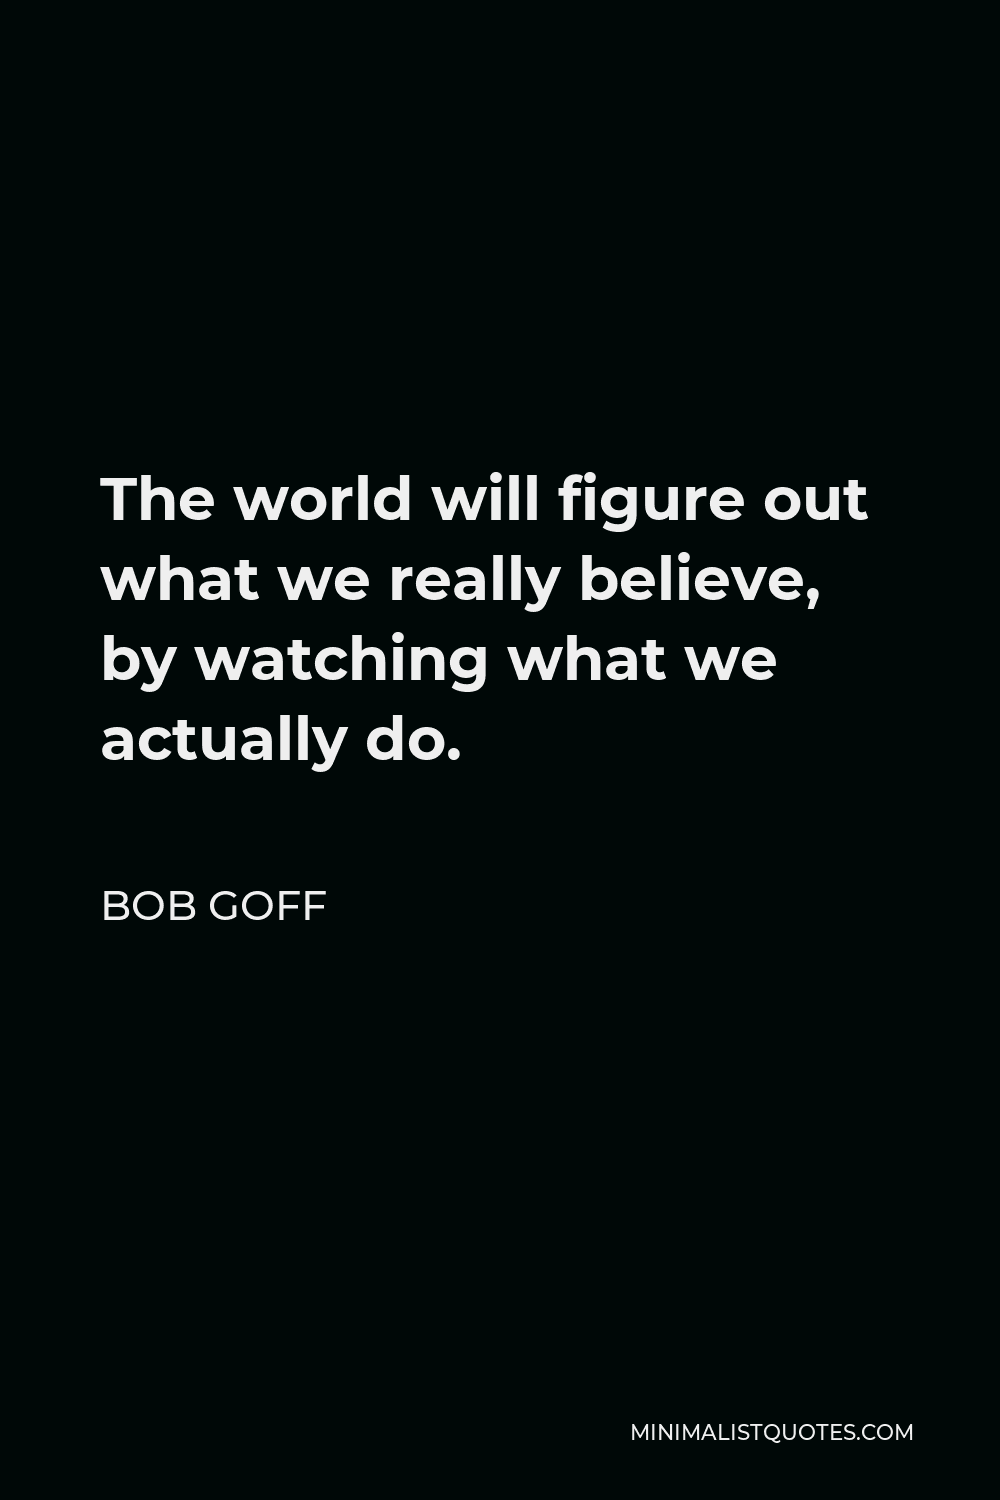 Bob Goff Quote - The world will figure out what we really believe, by watching what we actually do.